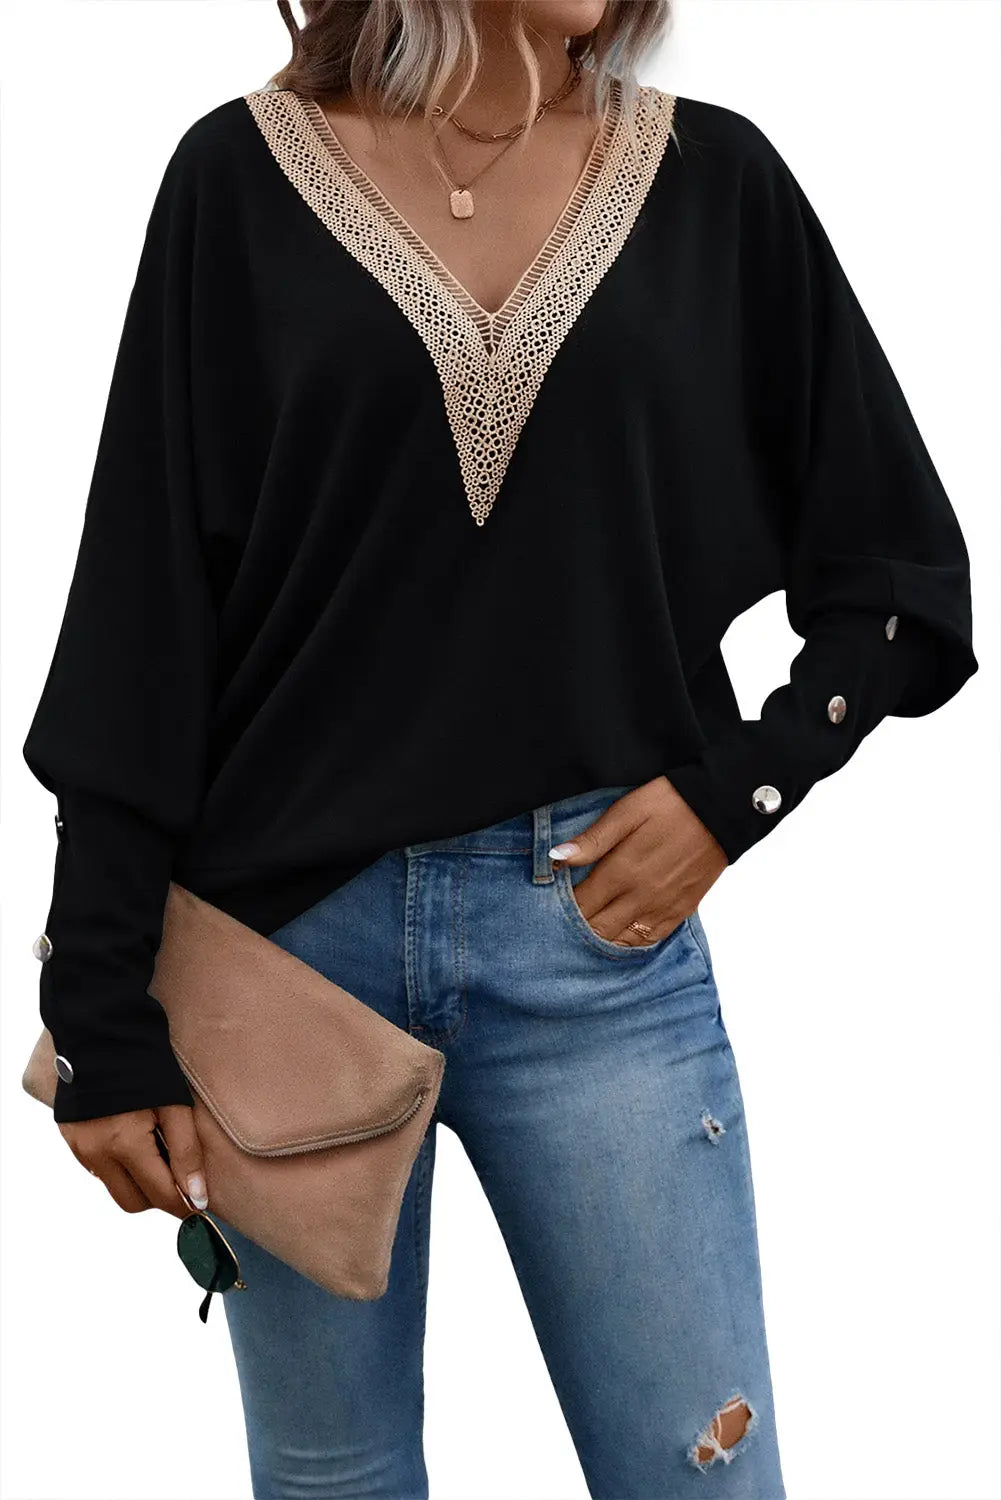 Black contrast guipure lace batwing sleeve top - long tops